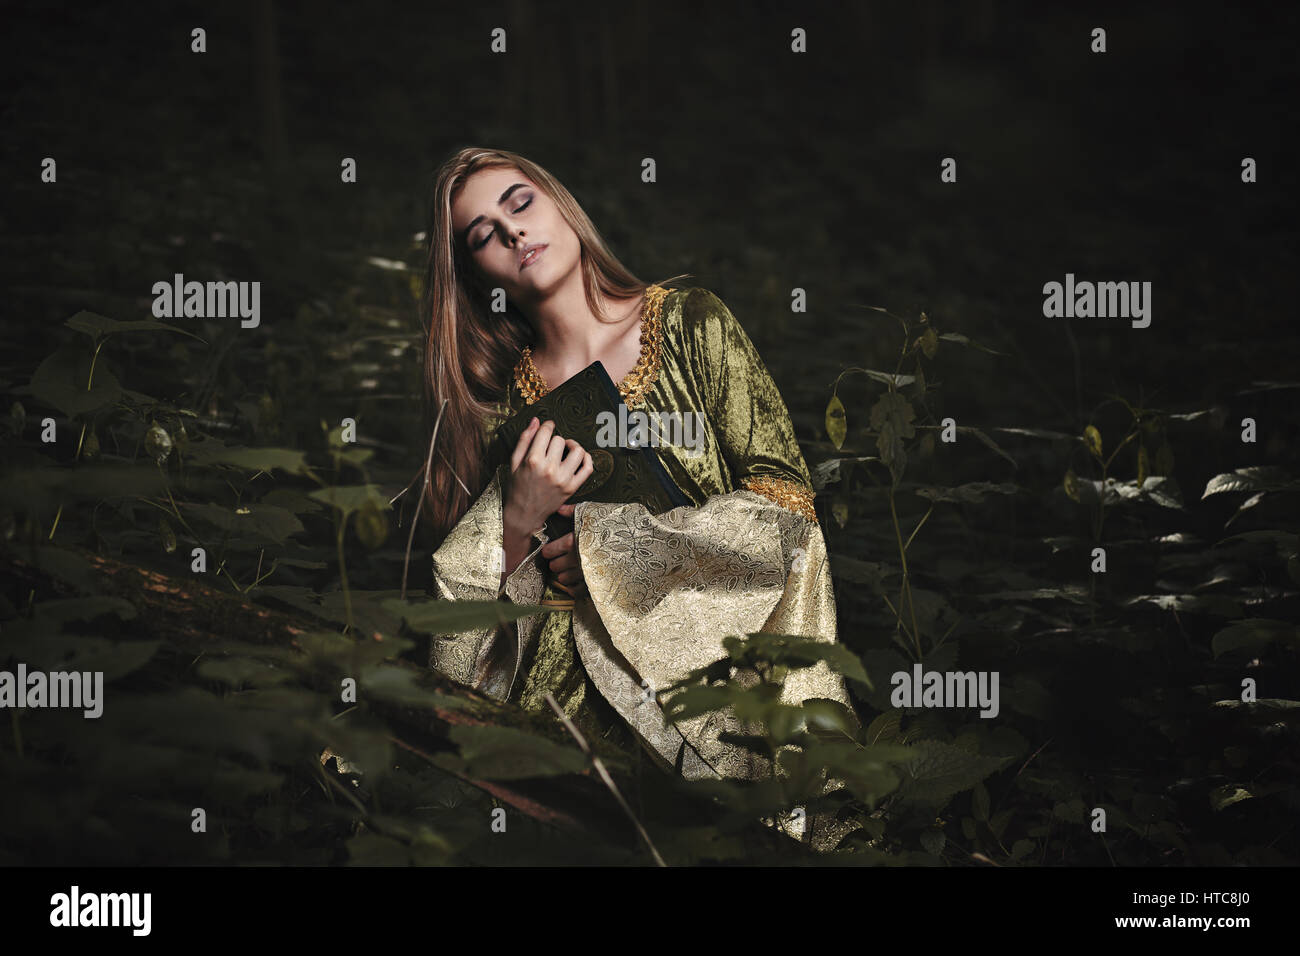 Woman with eyes closed in dark fairy forest. Fantasy story Stock Photo